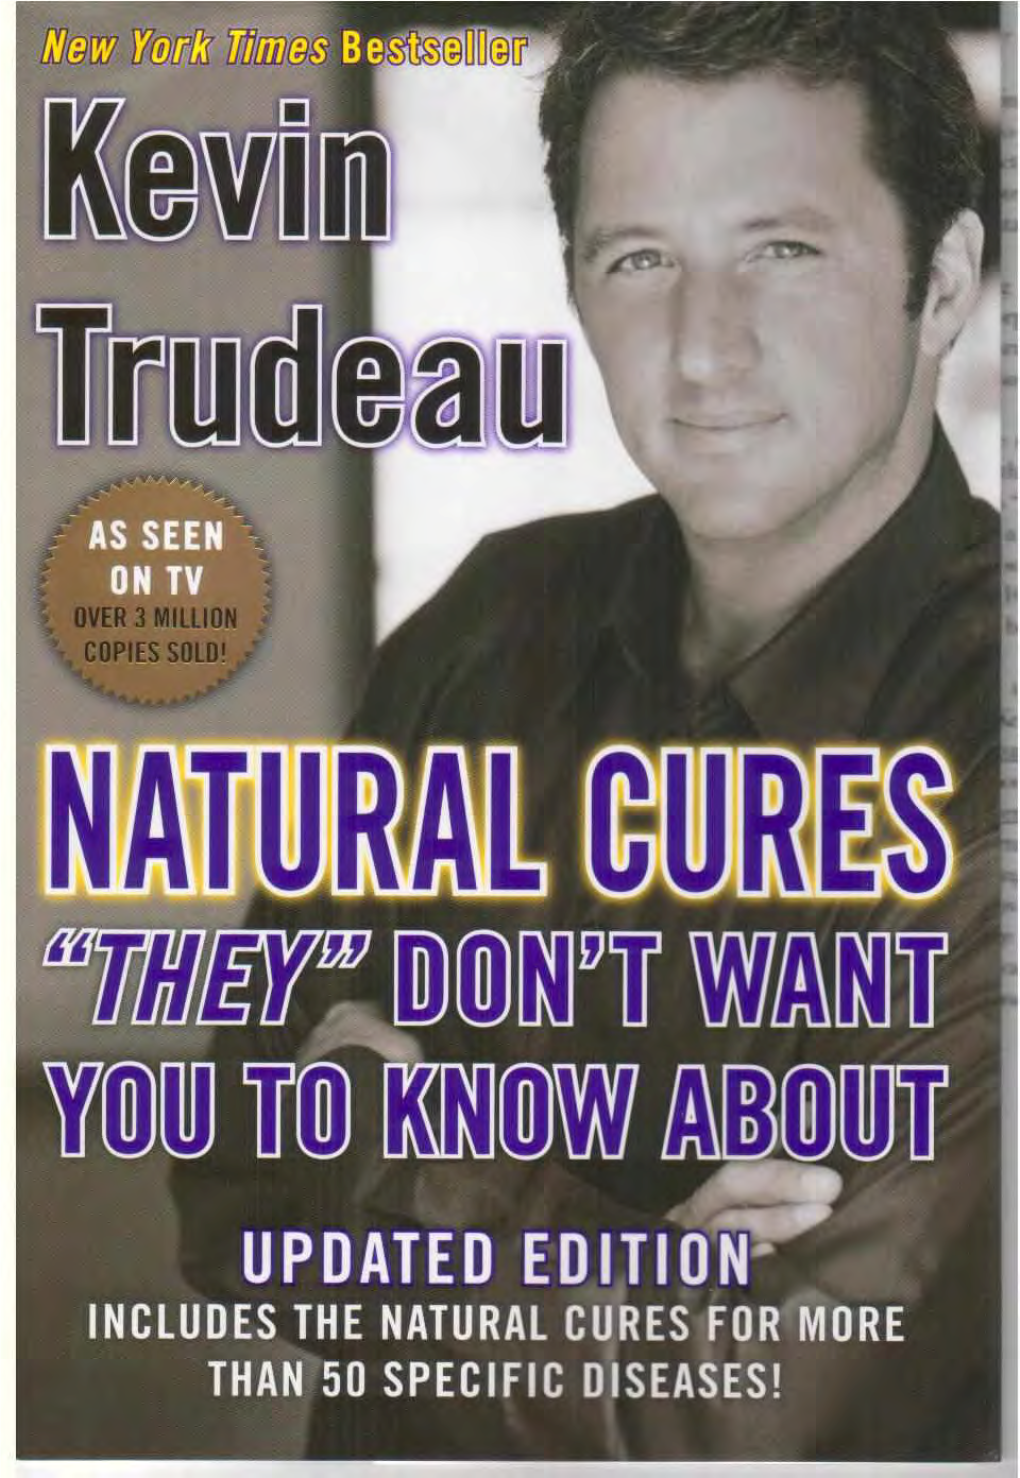 "Natural" Cures for Specific Diseases 341